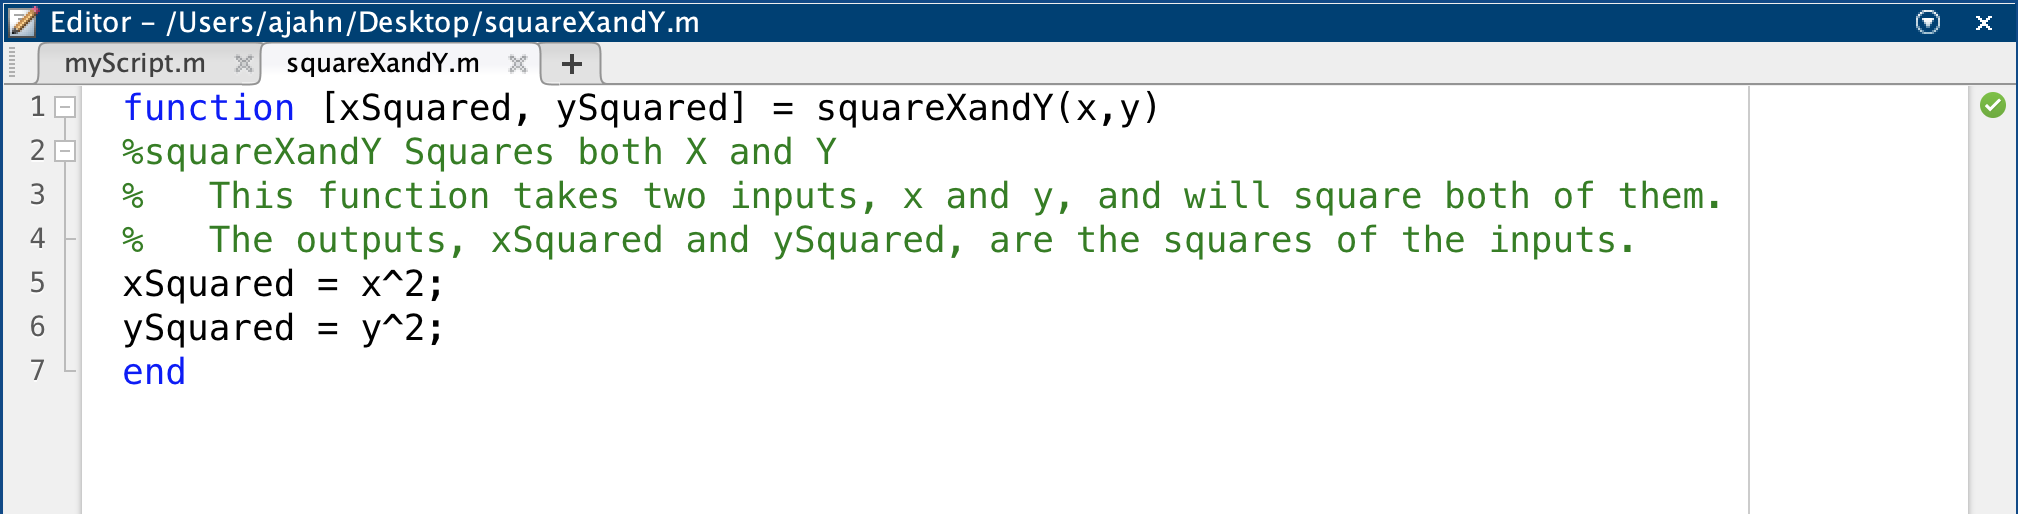 ../_images/03_squareXandY_Function.png